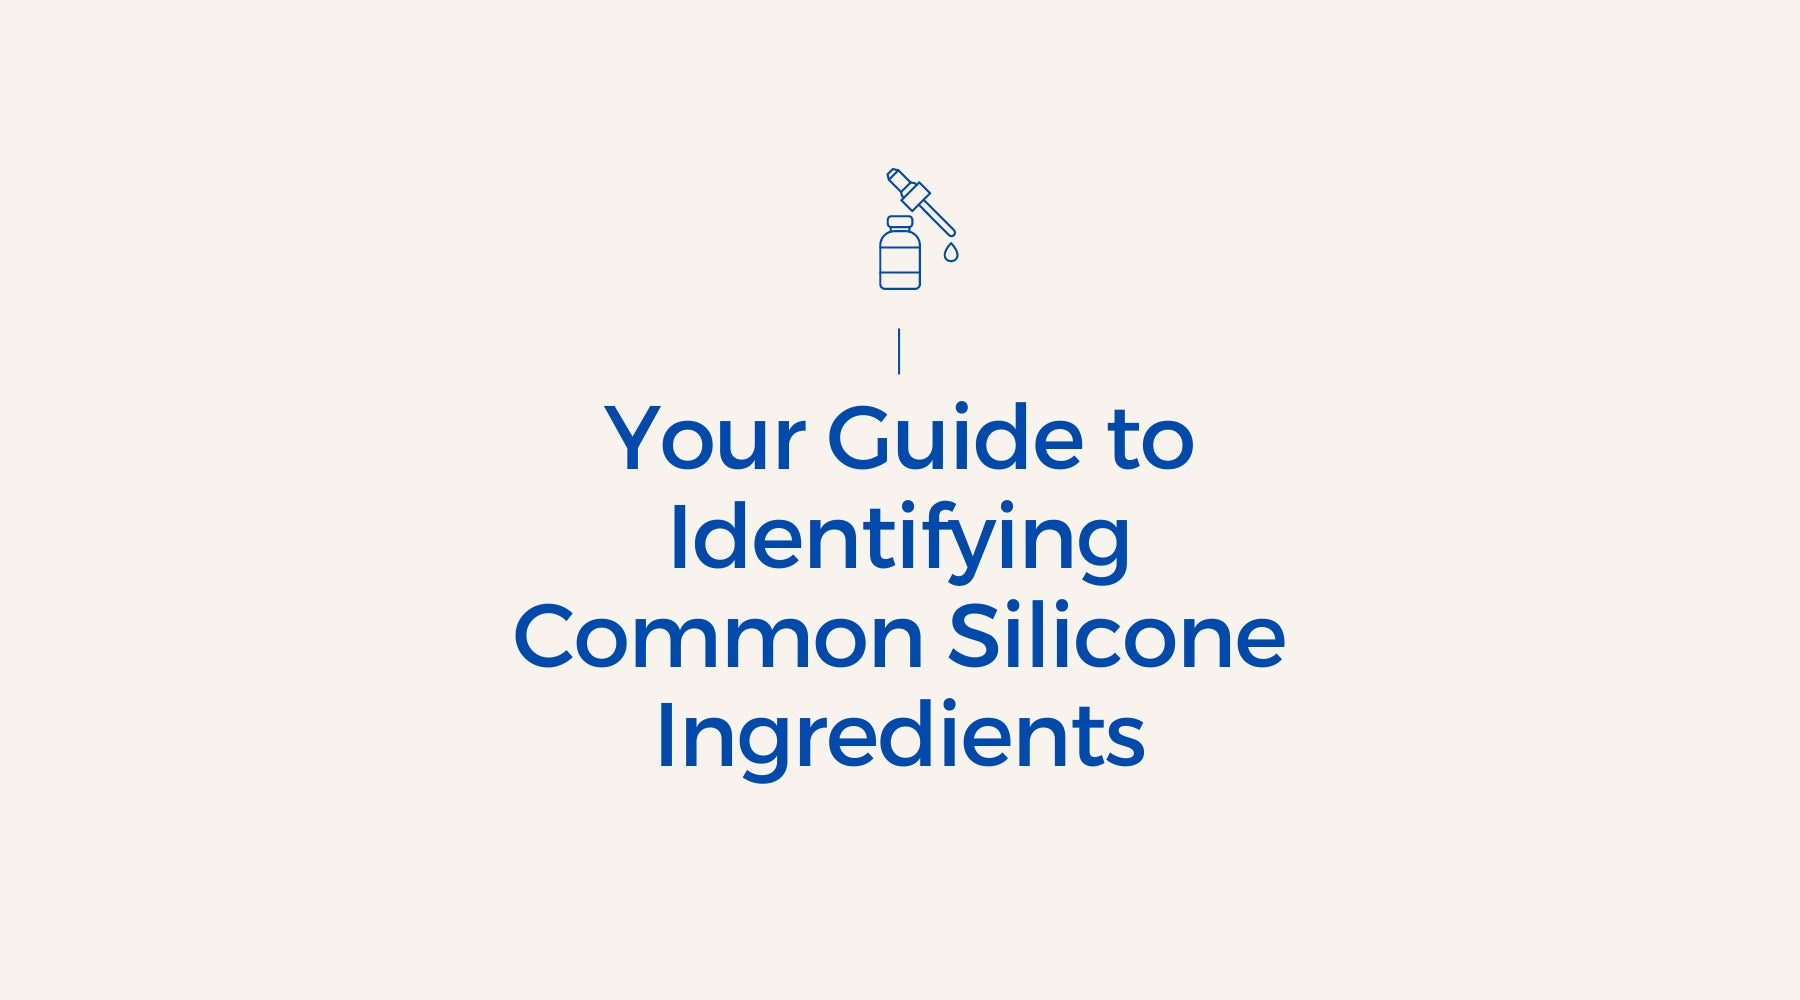 A Guide to Identifying Common Silicone Ingredients